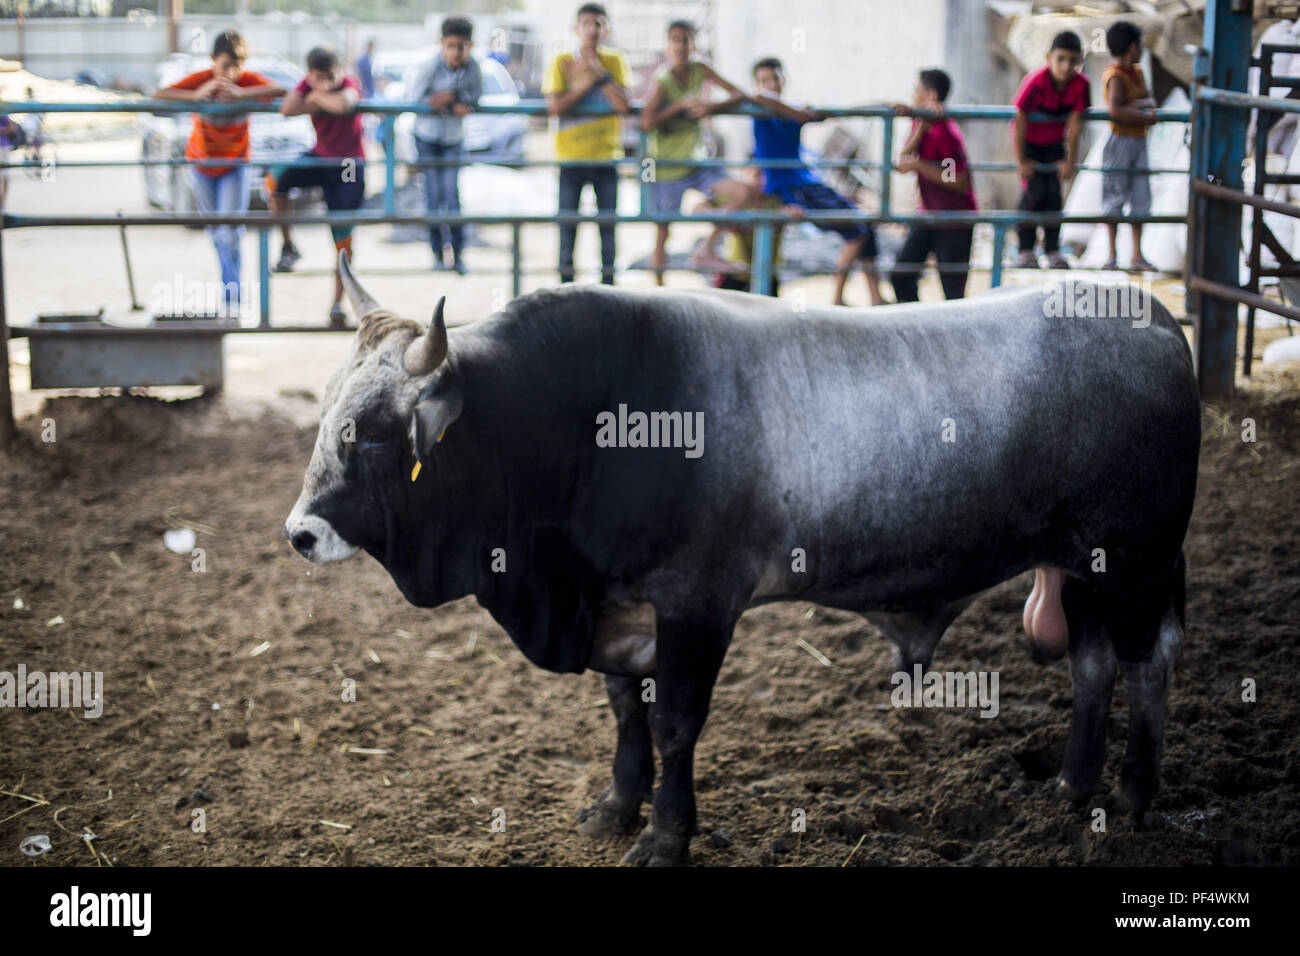 Gaza City, The Gaza Strip, Gaza. 18th Aug, 2018. A bull seen at the cattle shop.Palestinians gather in a cattle shop to purchase cattles to be sacrificed. before Eid al-Adha in the east of Jabalya refugee camp. Eid al-Adha (Festival of Sacrifice) is celebrated throughout the Islamic world as the commemoration of Abraham's will to sacrifice his son for God, cows, camels, goats and sheep are traditionally slaughtered on the Holy Day. Credit: Mahmoud Issa/SOPA Images/ZUMA Wire/Alamy Live News Stock Photo